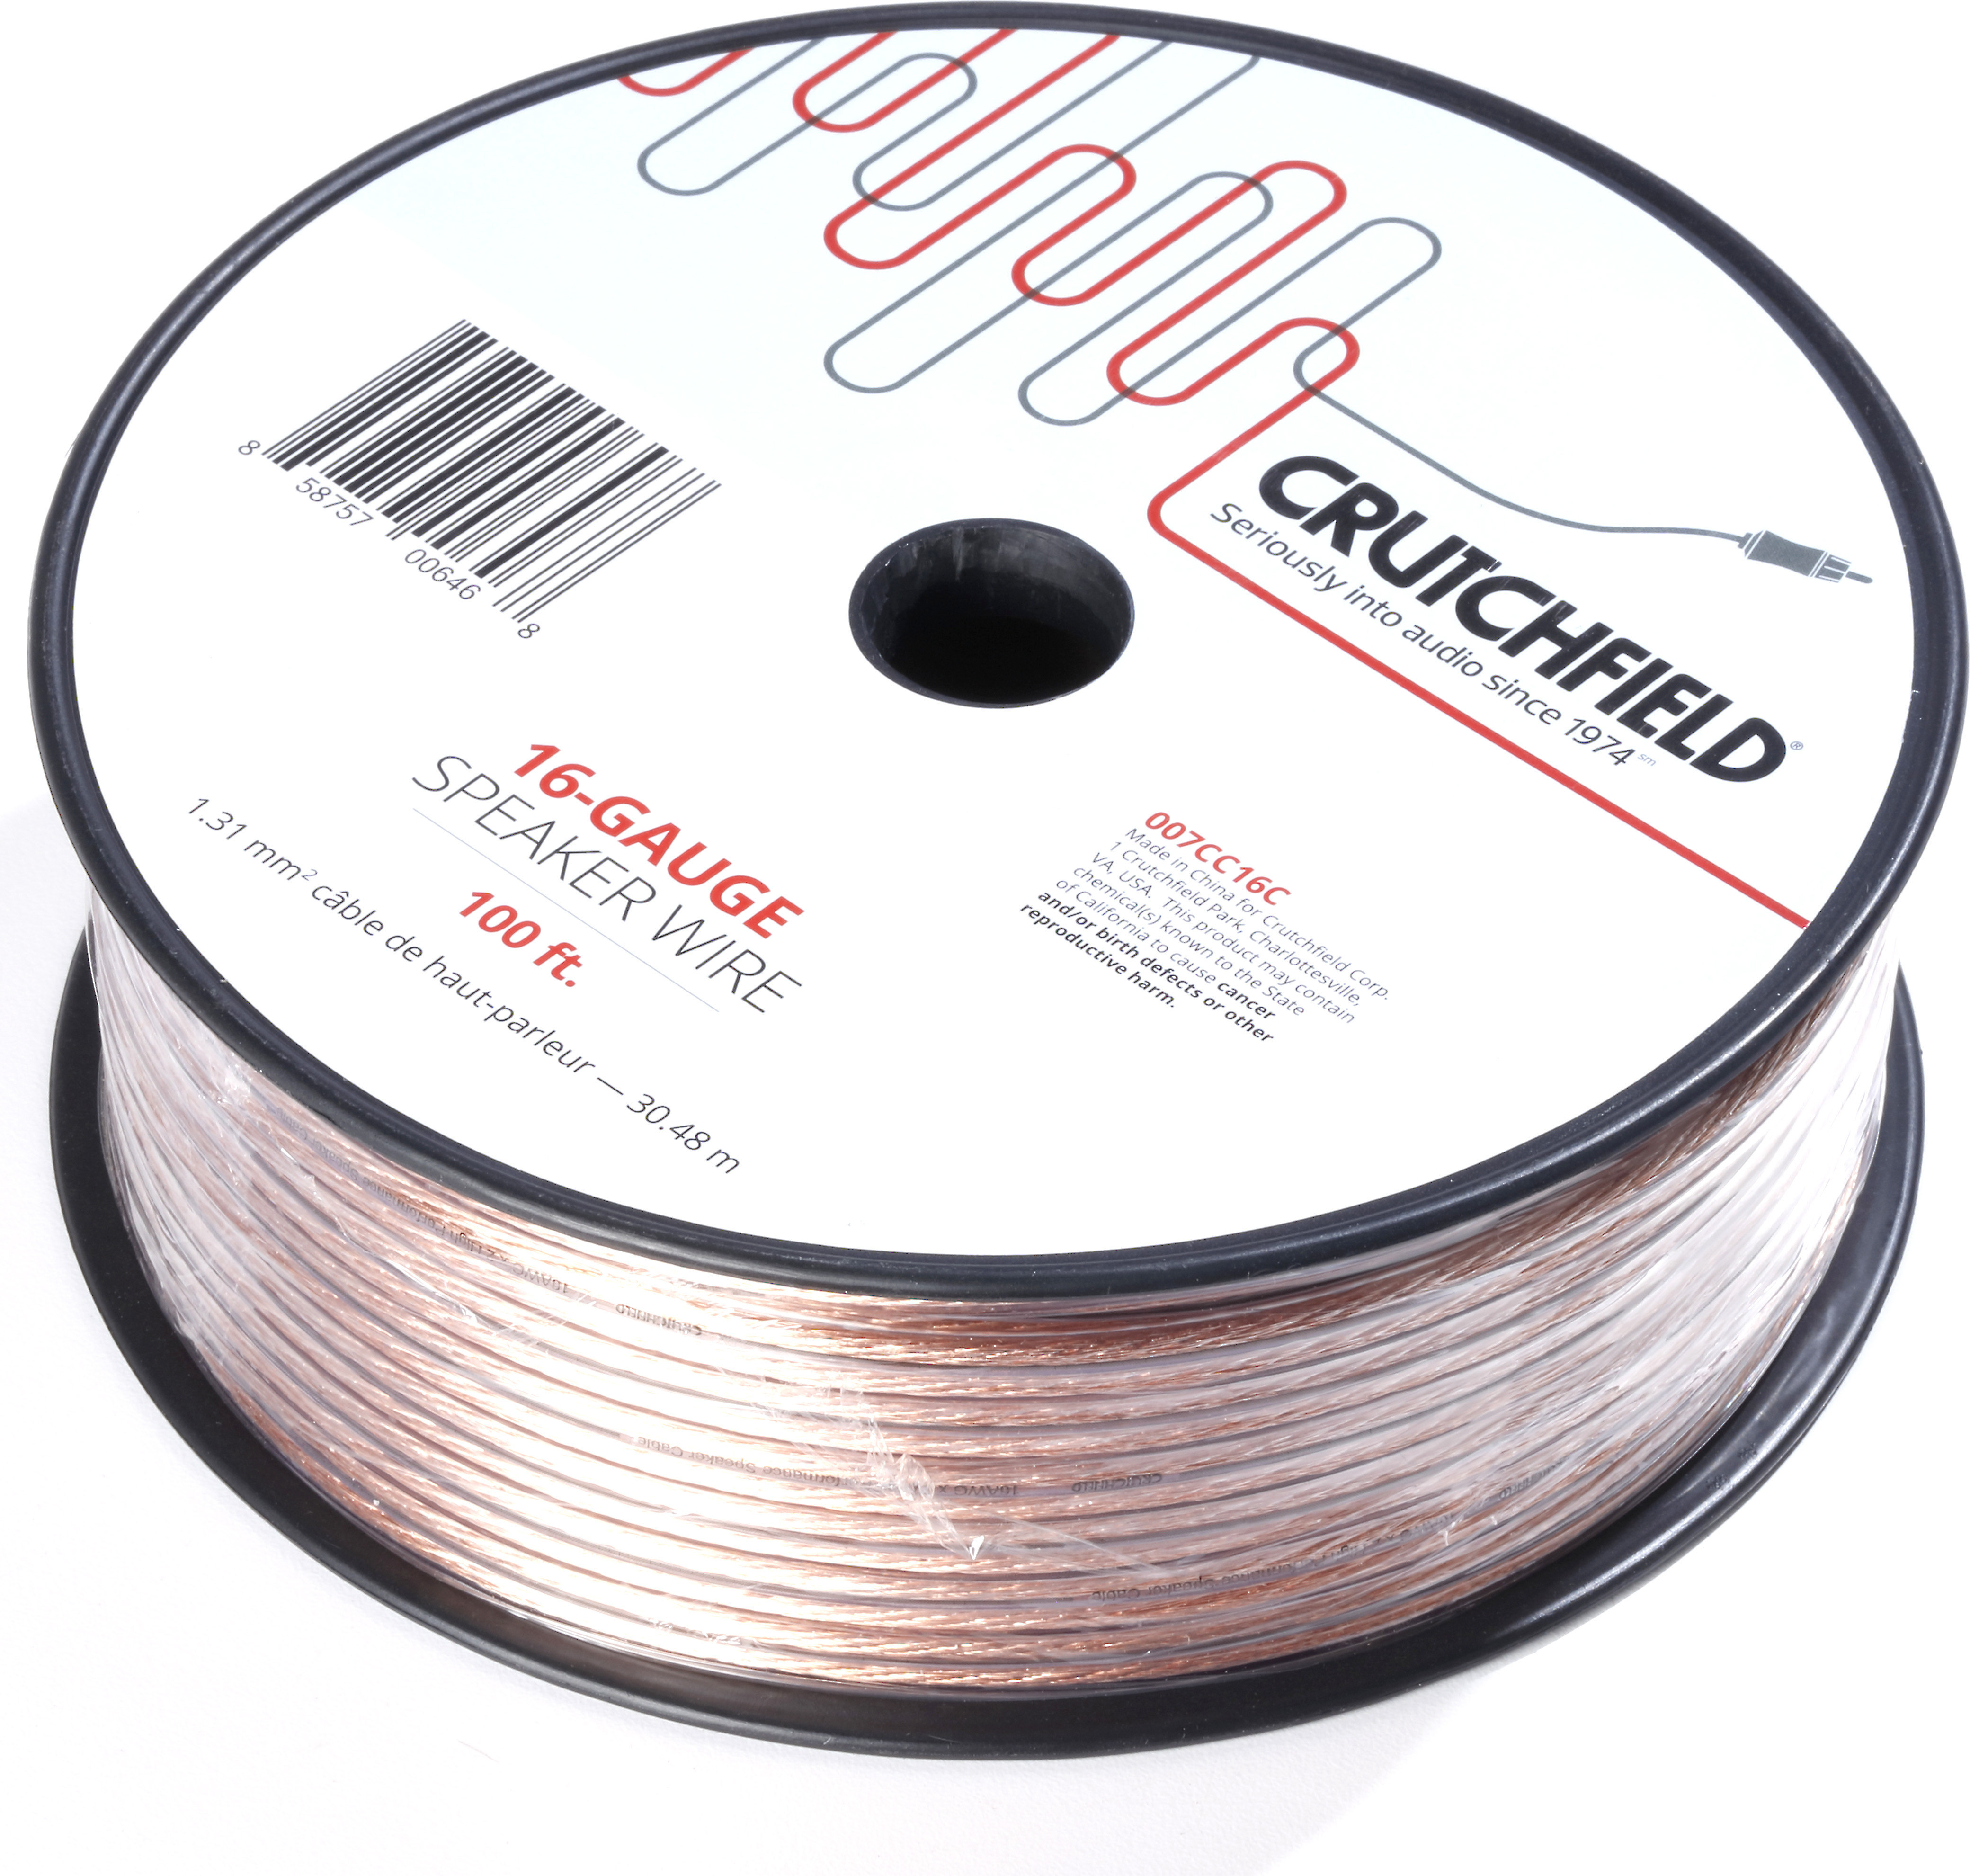 Crutchfield Speaker Wire (10-gauge) Available in 5 different sizes